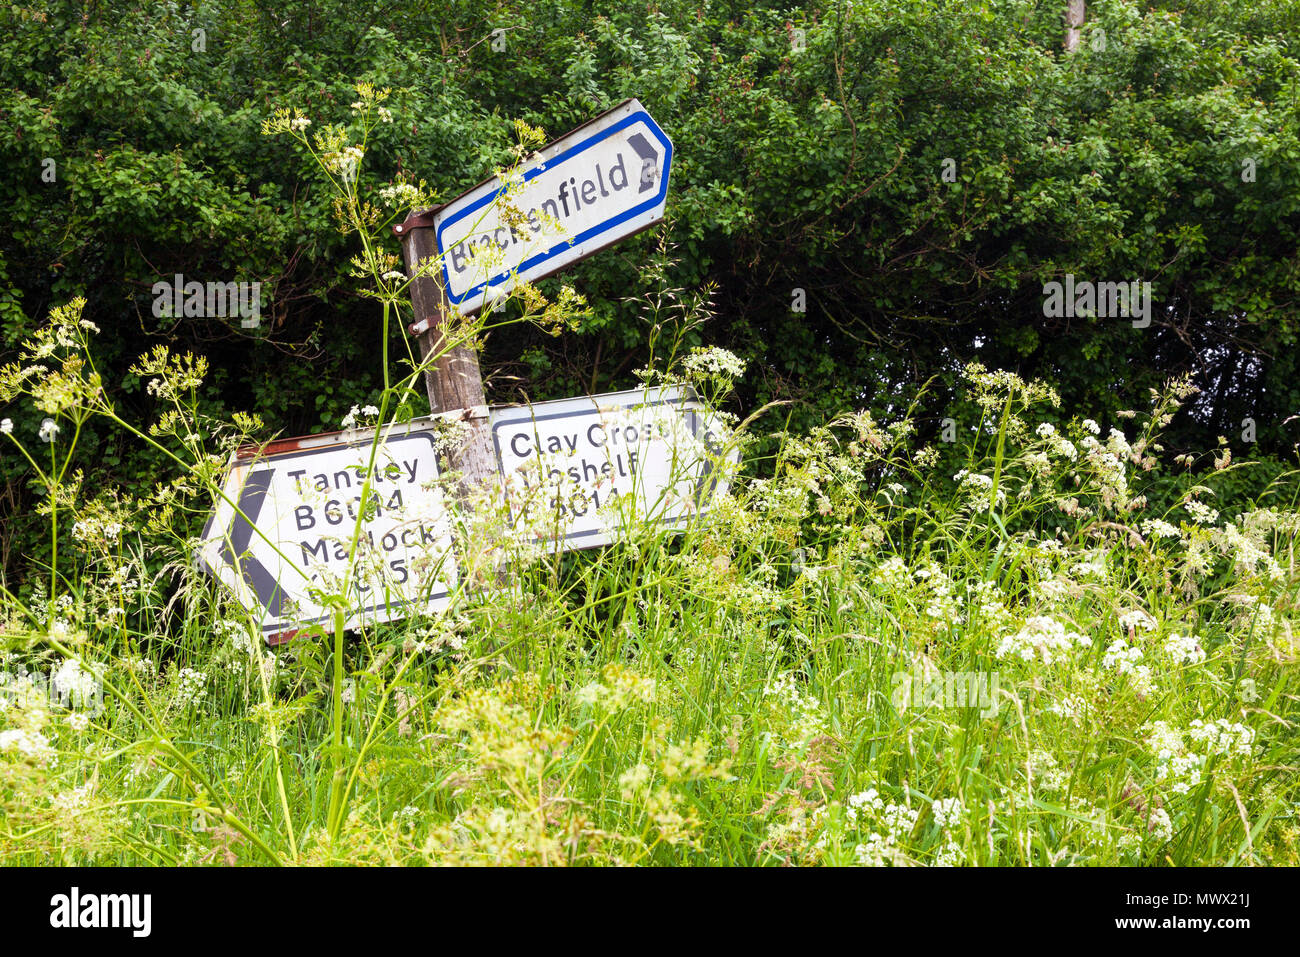 Brackenfield, Derbyshire, U.K. 2nd June 2018. Warm weather with sunshine and showers brings a spurt of growth to the hedgerows and grass verges on the B6014 near the Derbyshire village of Brackenfield. Credit: Mark Richardson/Alamy Live News Stock Photo